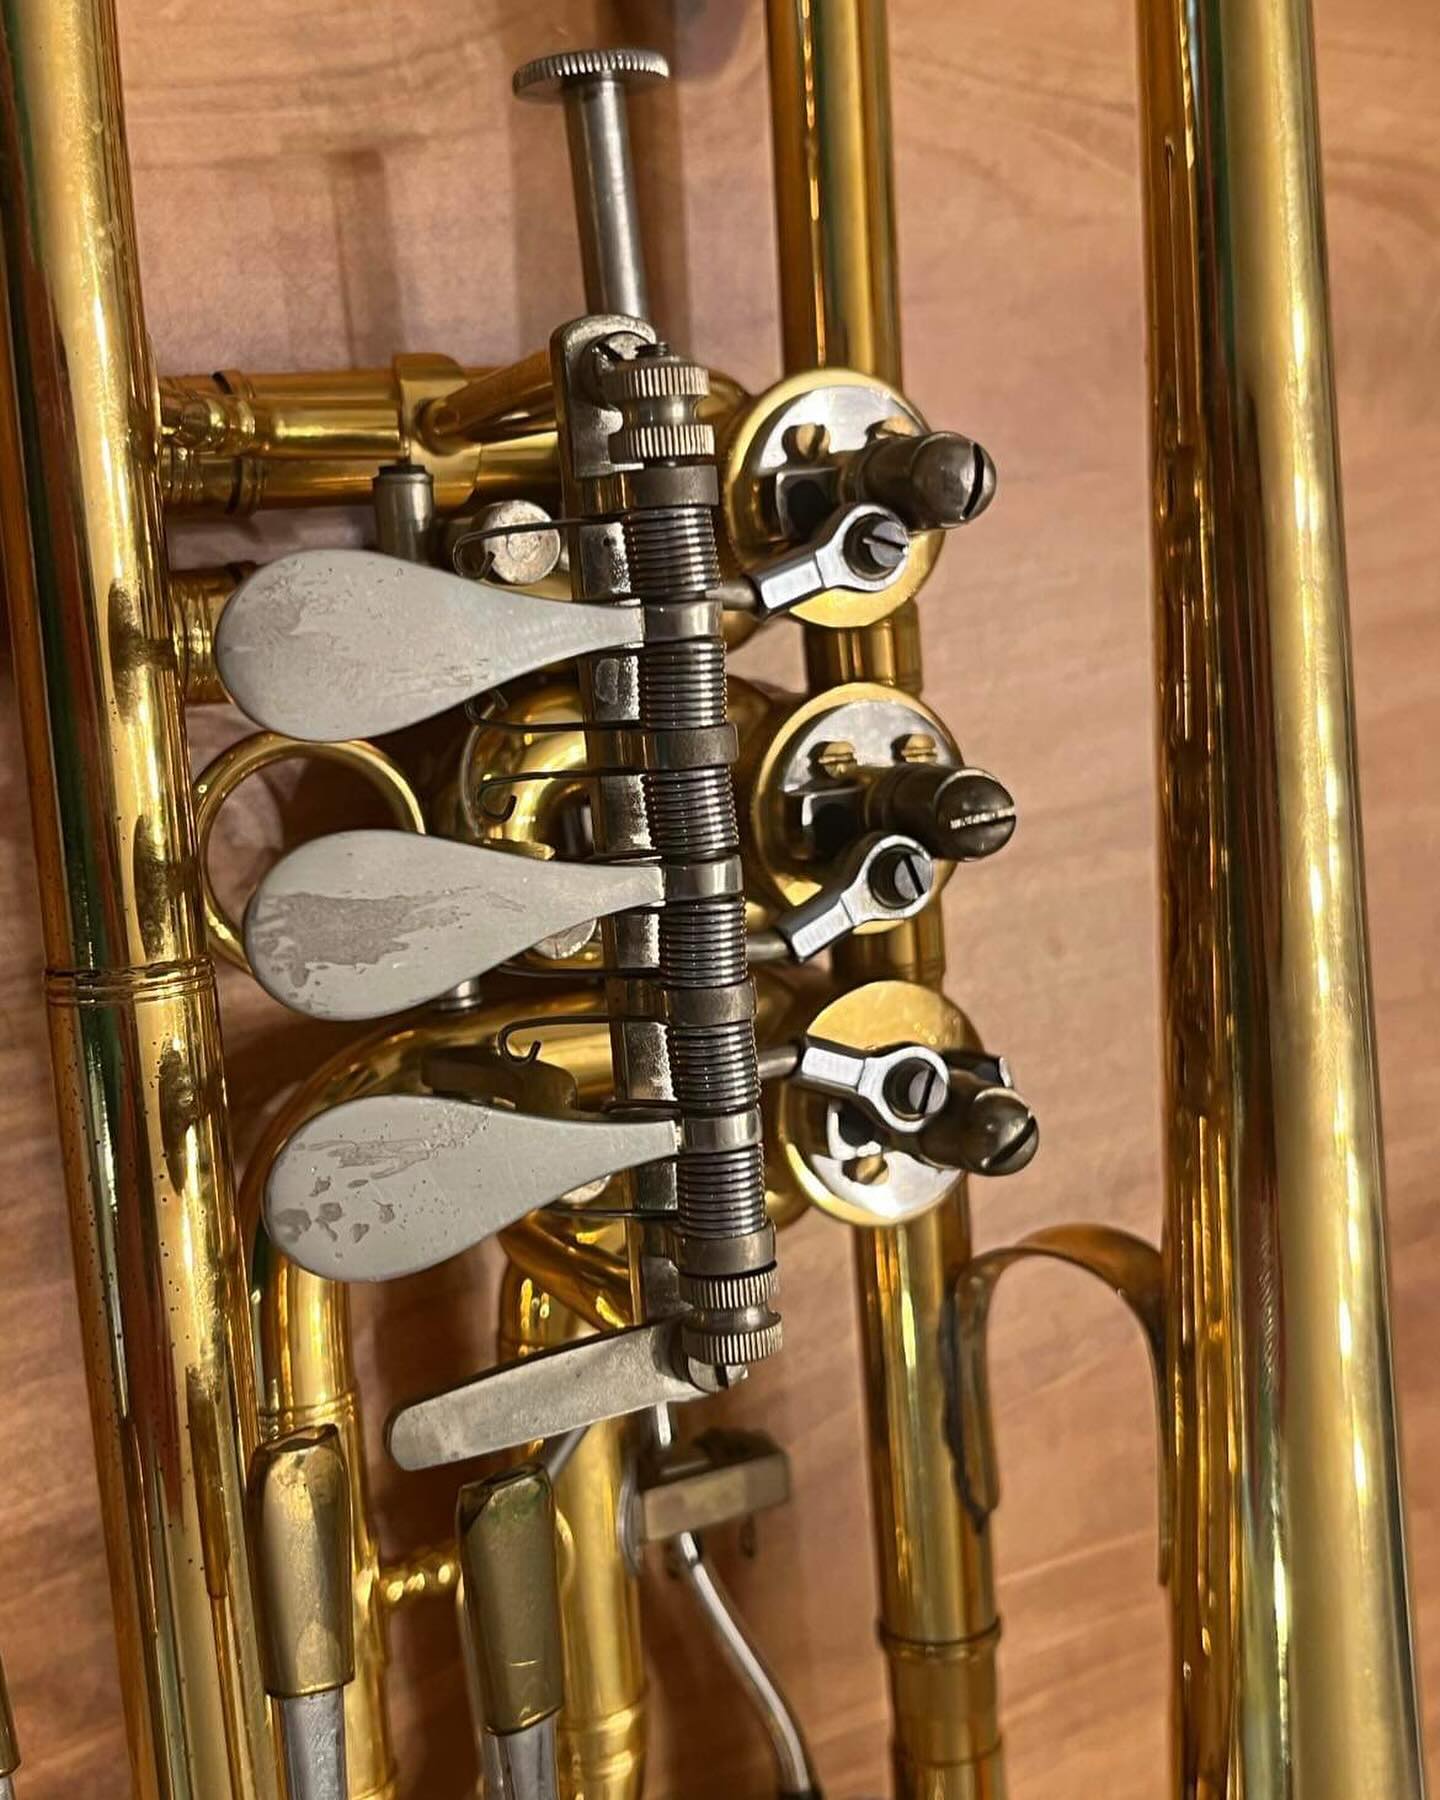 Lechner -  C Rotary Trumpet Orchestra Model